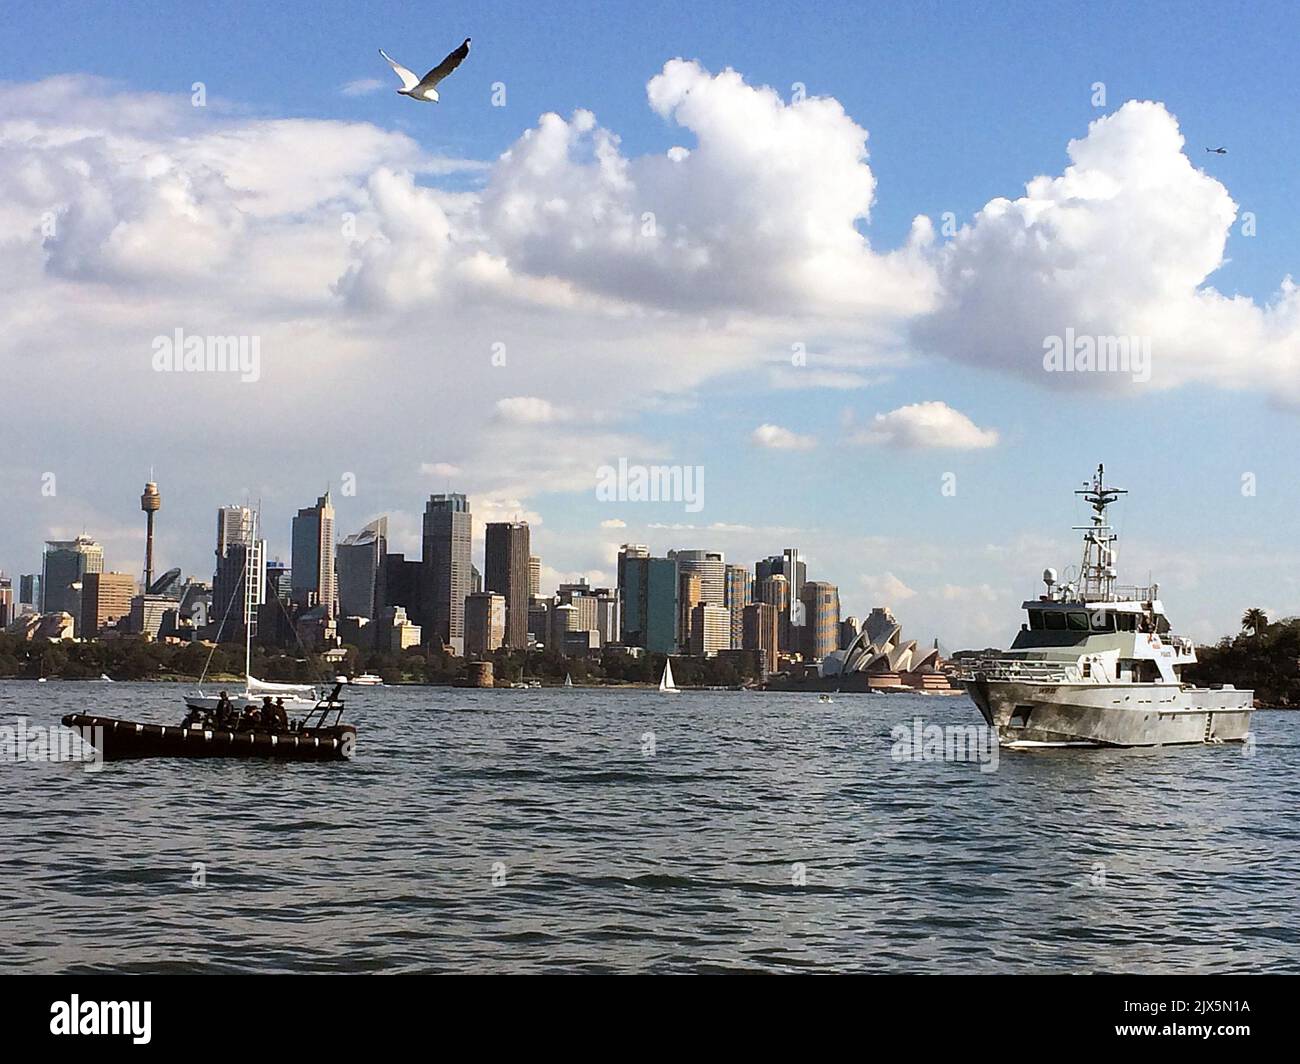 rent Spild Koncession New South Wales water police are seen on Sydney Harbour during the visit of  Vice President of the United States, Mike Pence on Sunday, April 23, 2017.  Vice President Pence is visiting